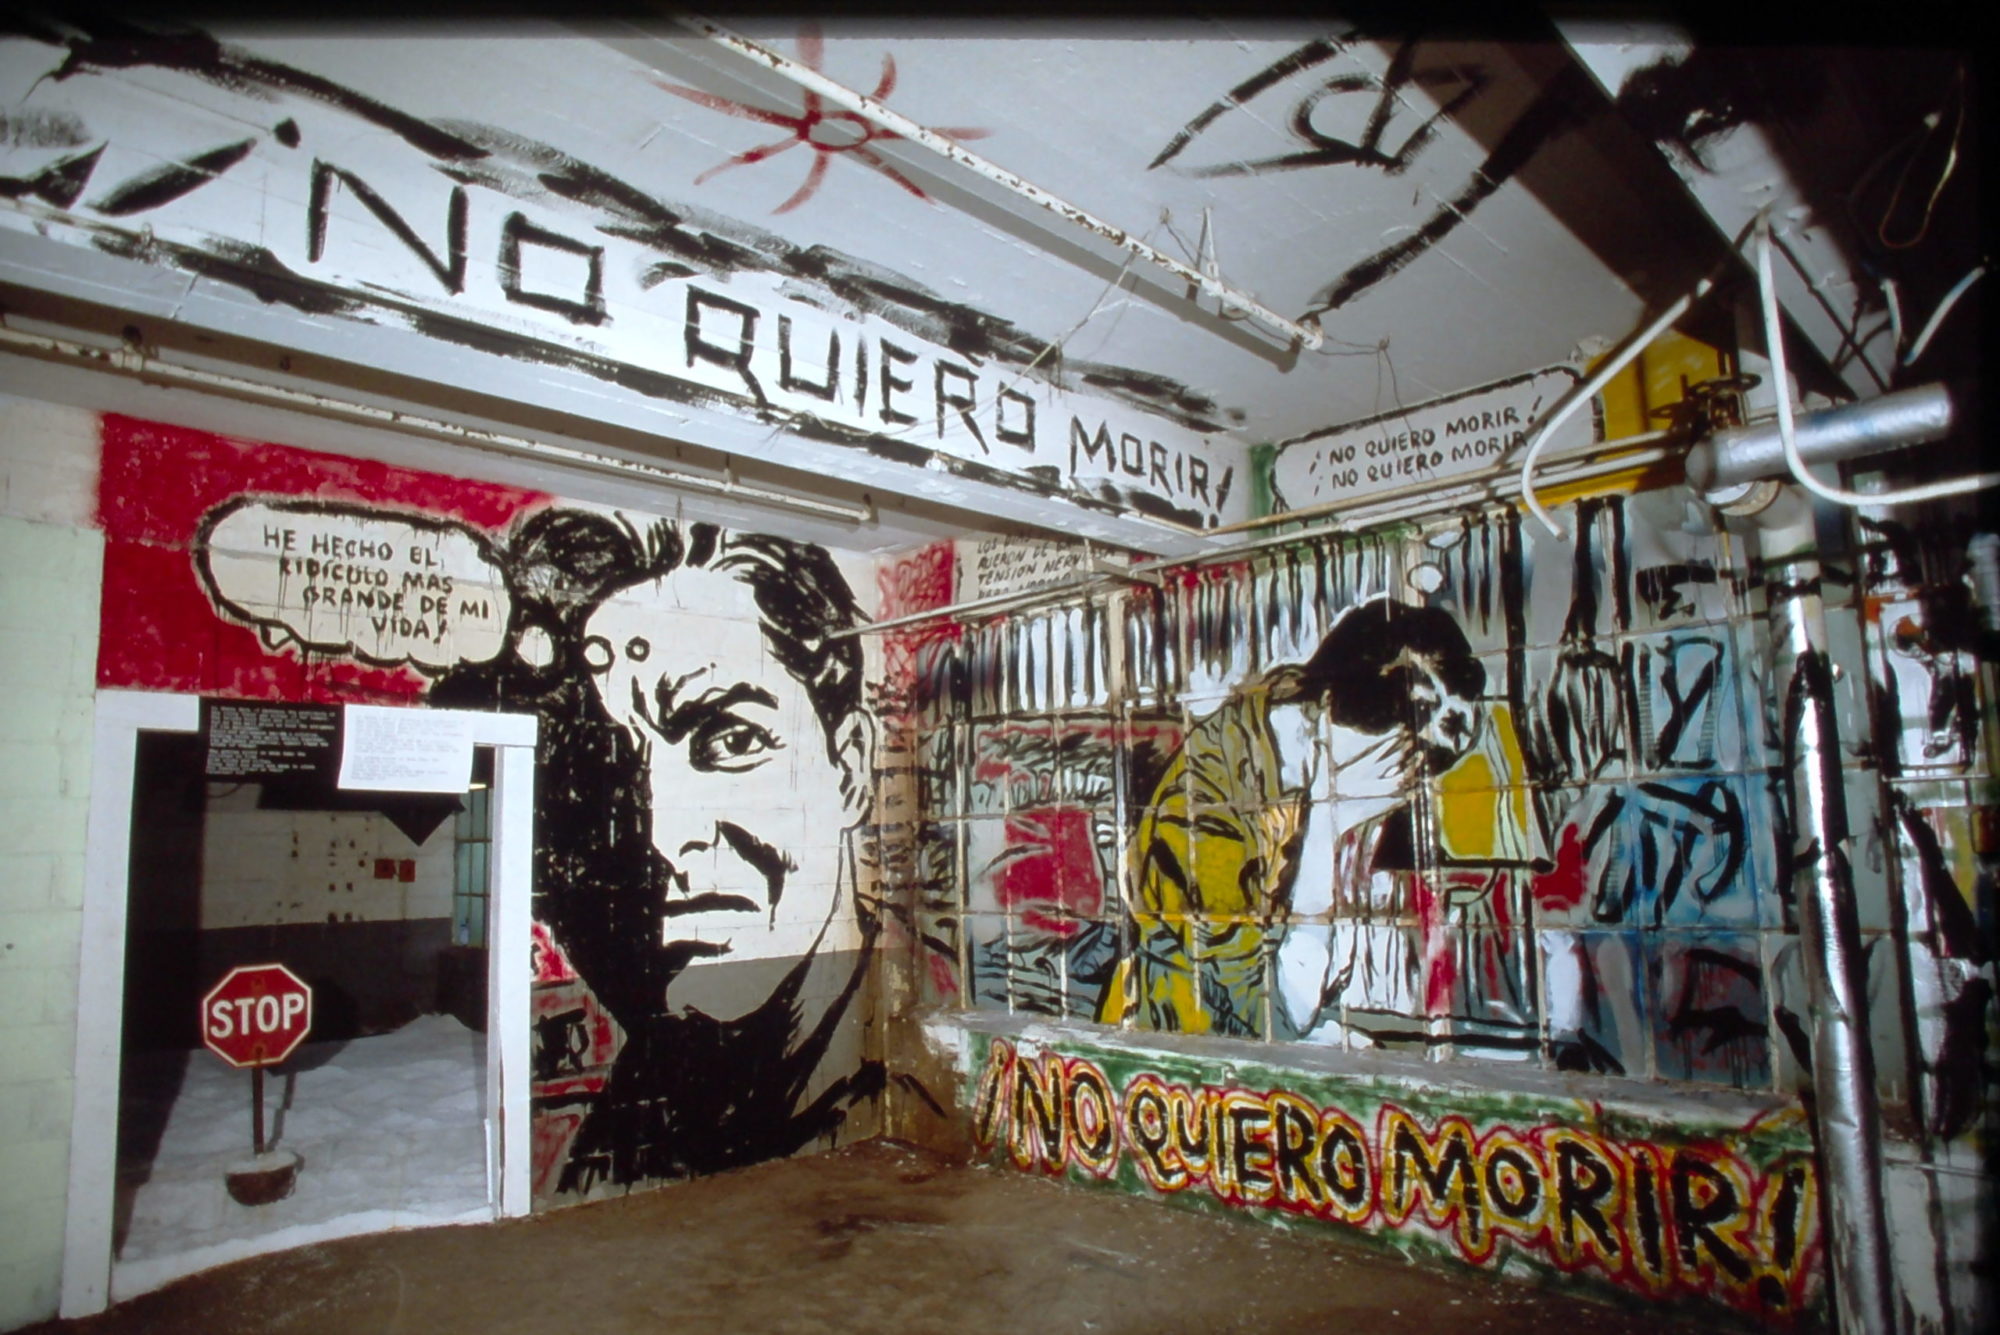 An image of an art installation with colorfully painted individuals and the phrase 